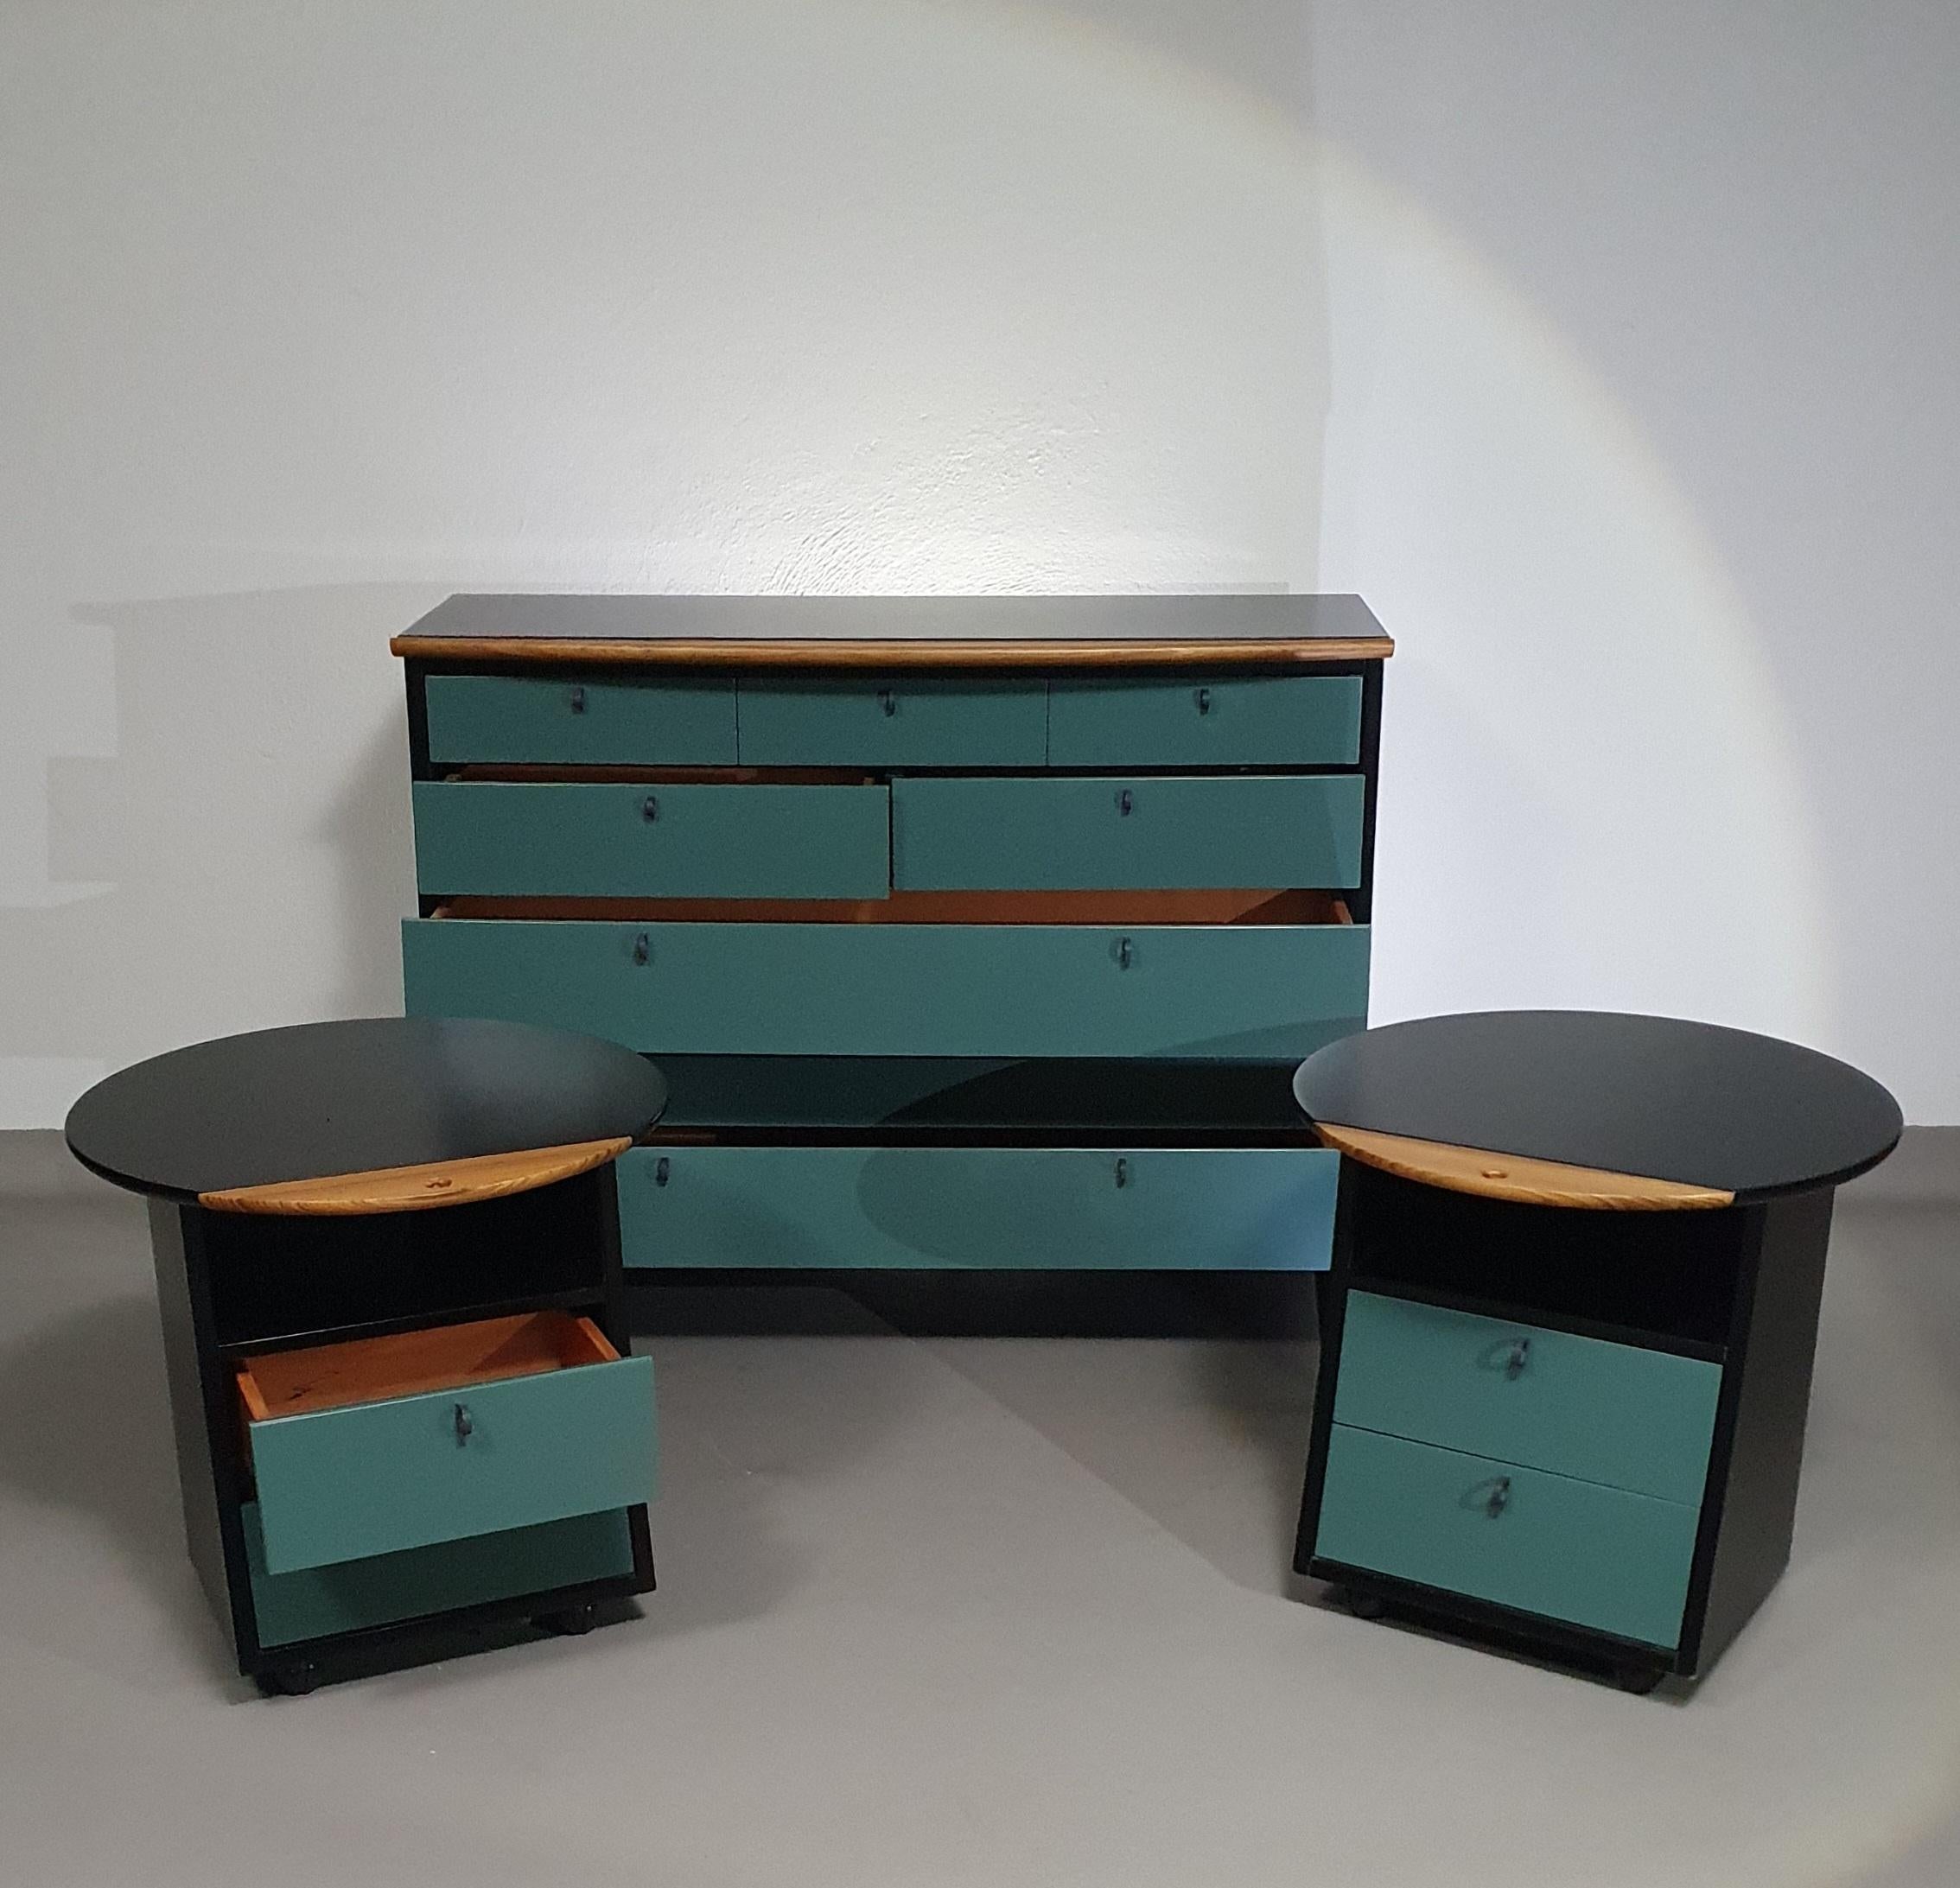 Chest of drawers / bedside tables
2 x Italian Bedside nightstands Tables / 1 x sideboard by Umberto Asnago for Giorgetti Italia, 1982, Set of 3
Creator
Umberto Asnago
Manufacturer
Giorgetti
Design Period
1980 to 1989
Year
1982
Production